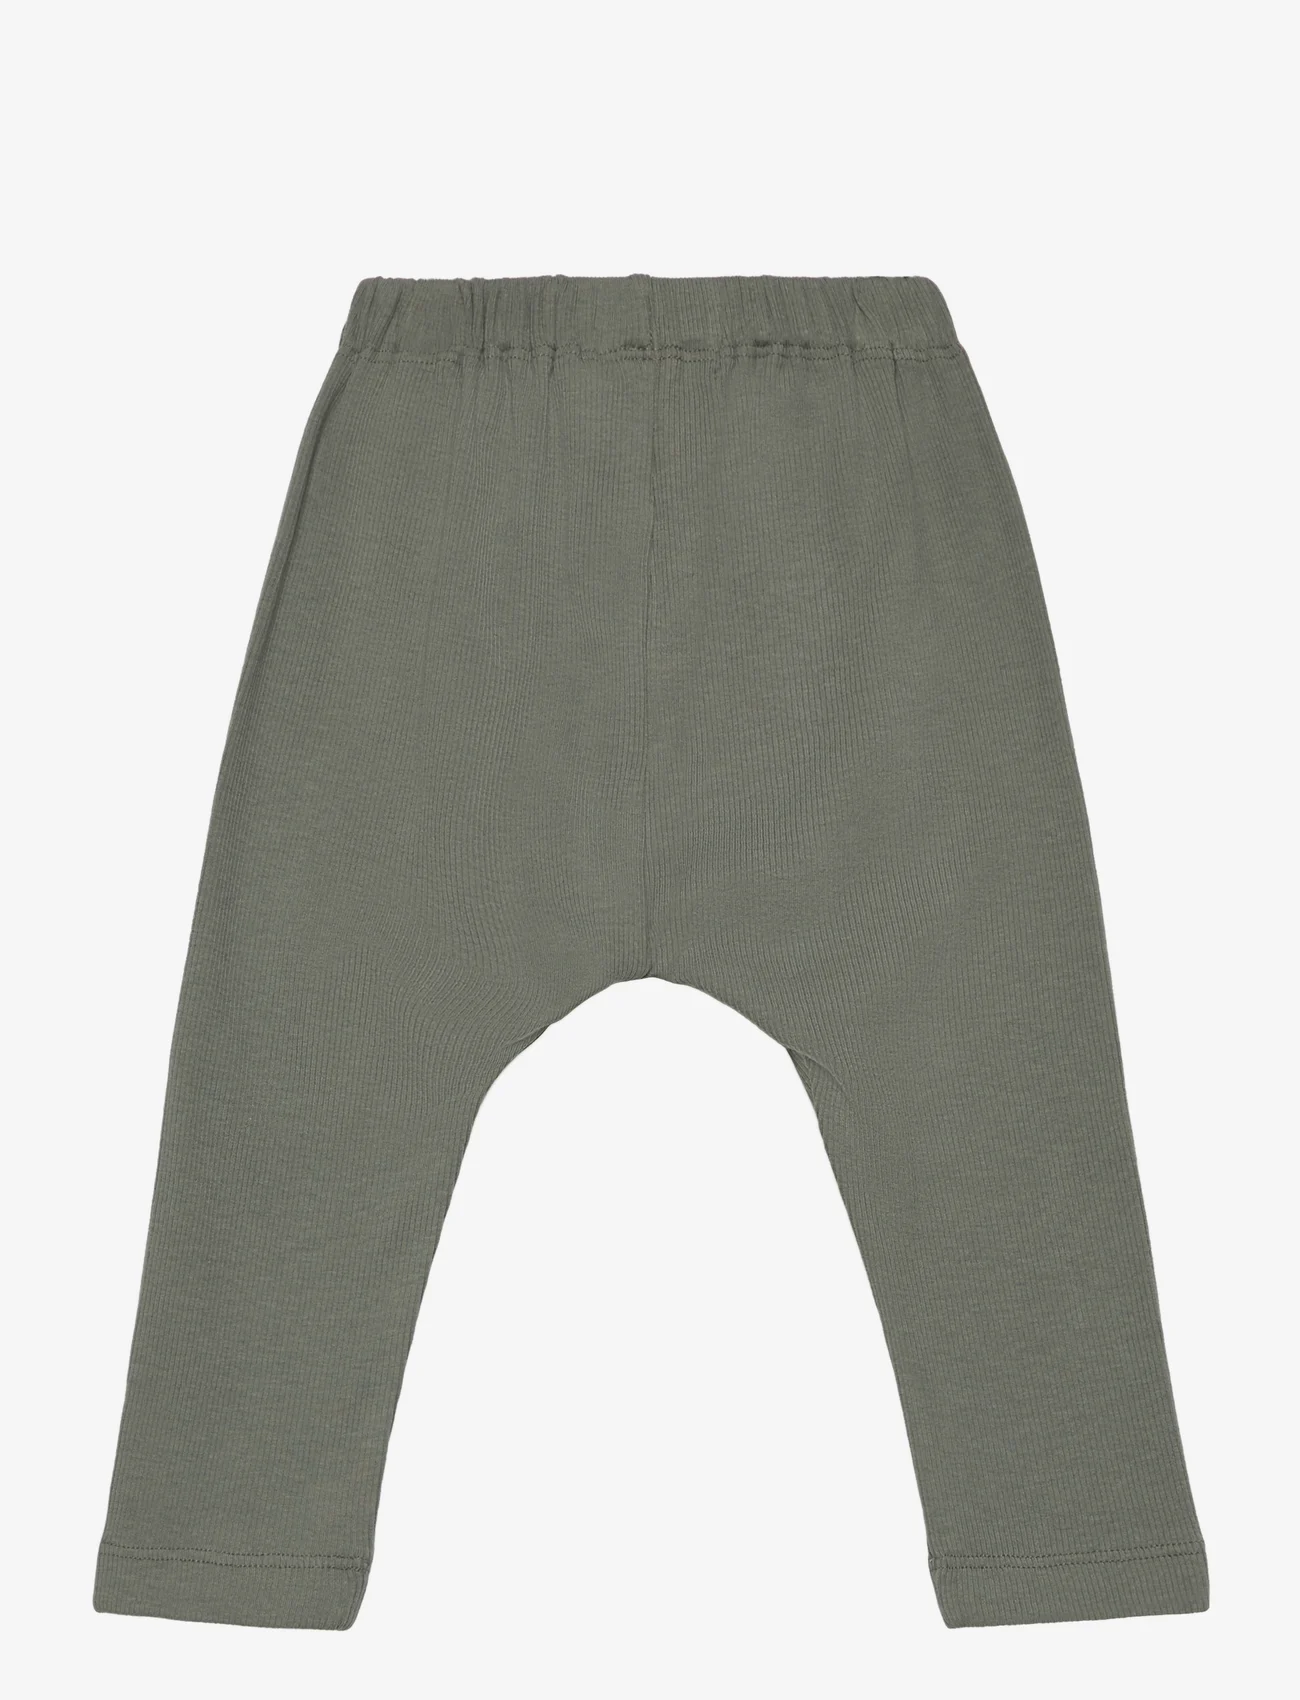 Lil'Atelier - NBMGAGO LOOSE PANT LIL NOOS - alhaisimmat hinnat - agave green - 1